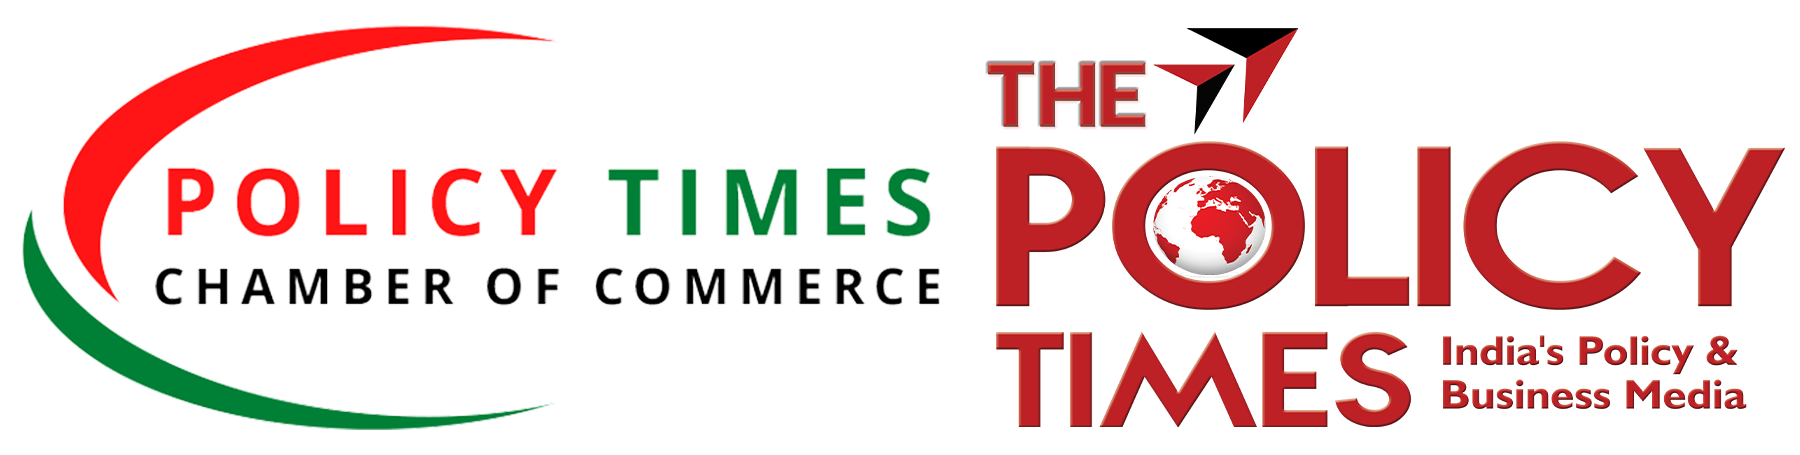 Policy Times Chamber of Commerce (PTCC)